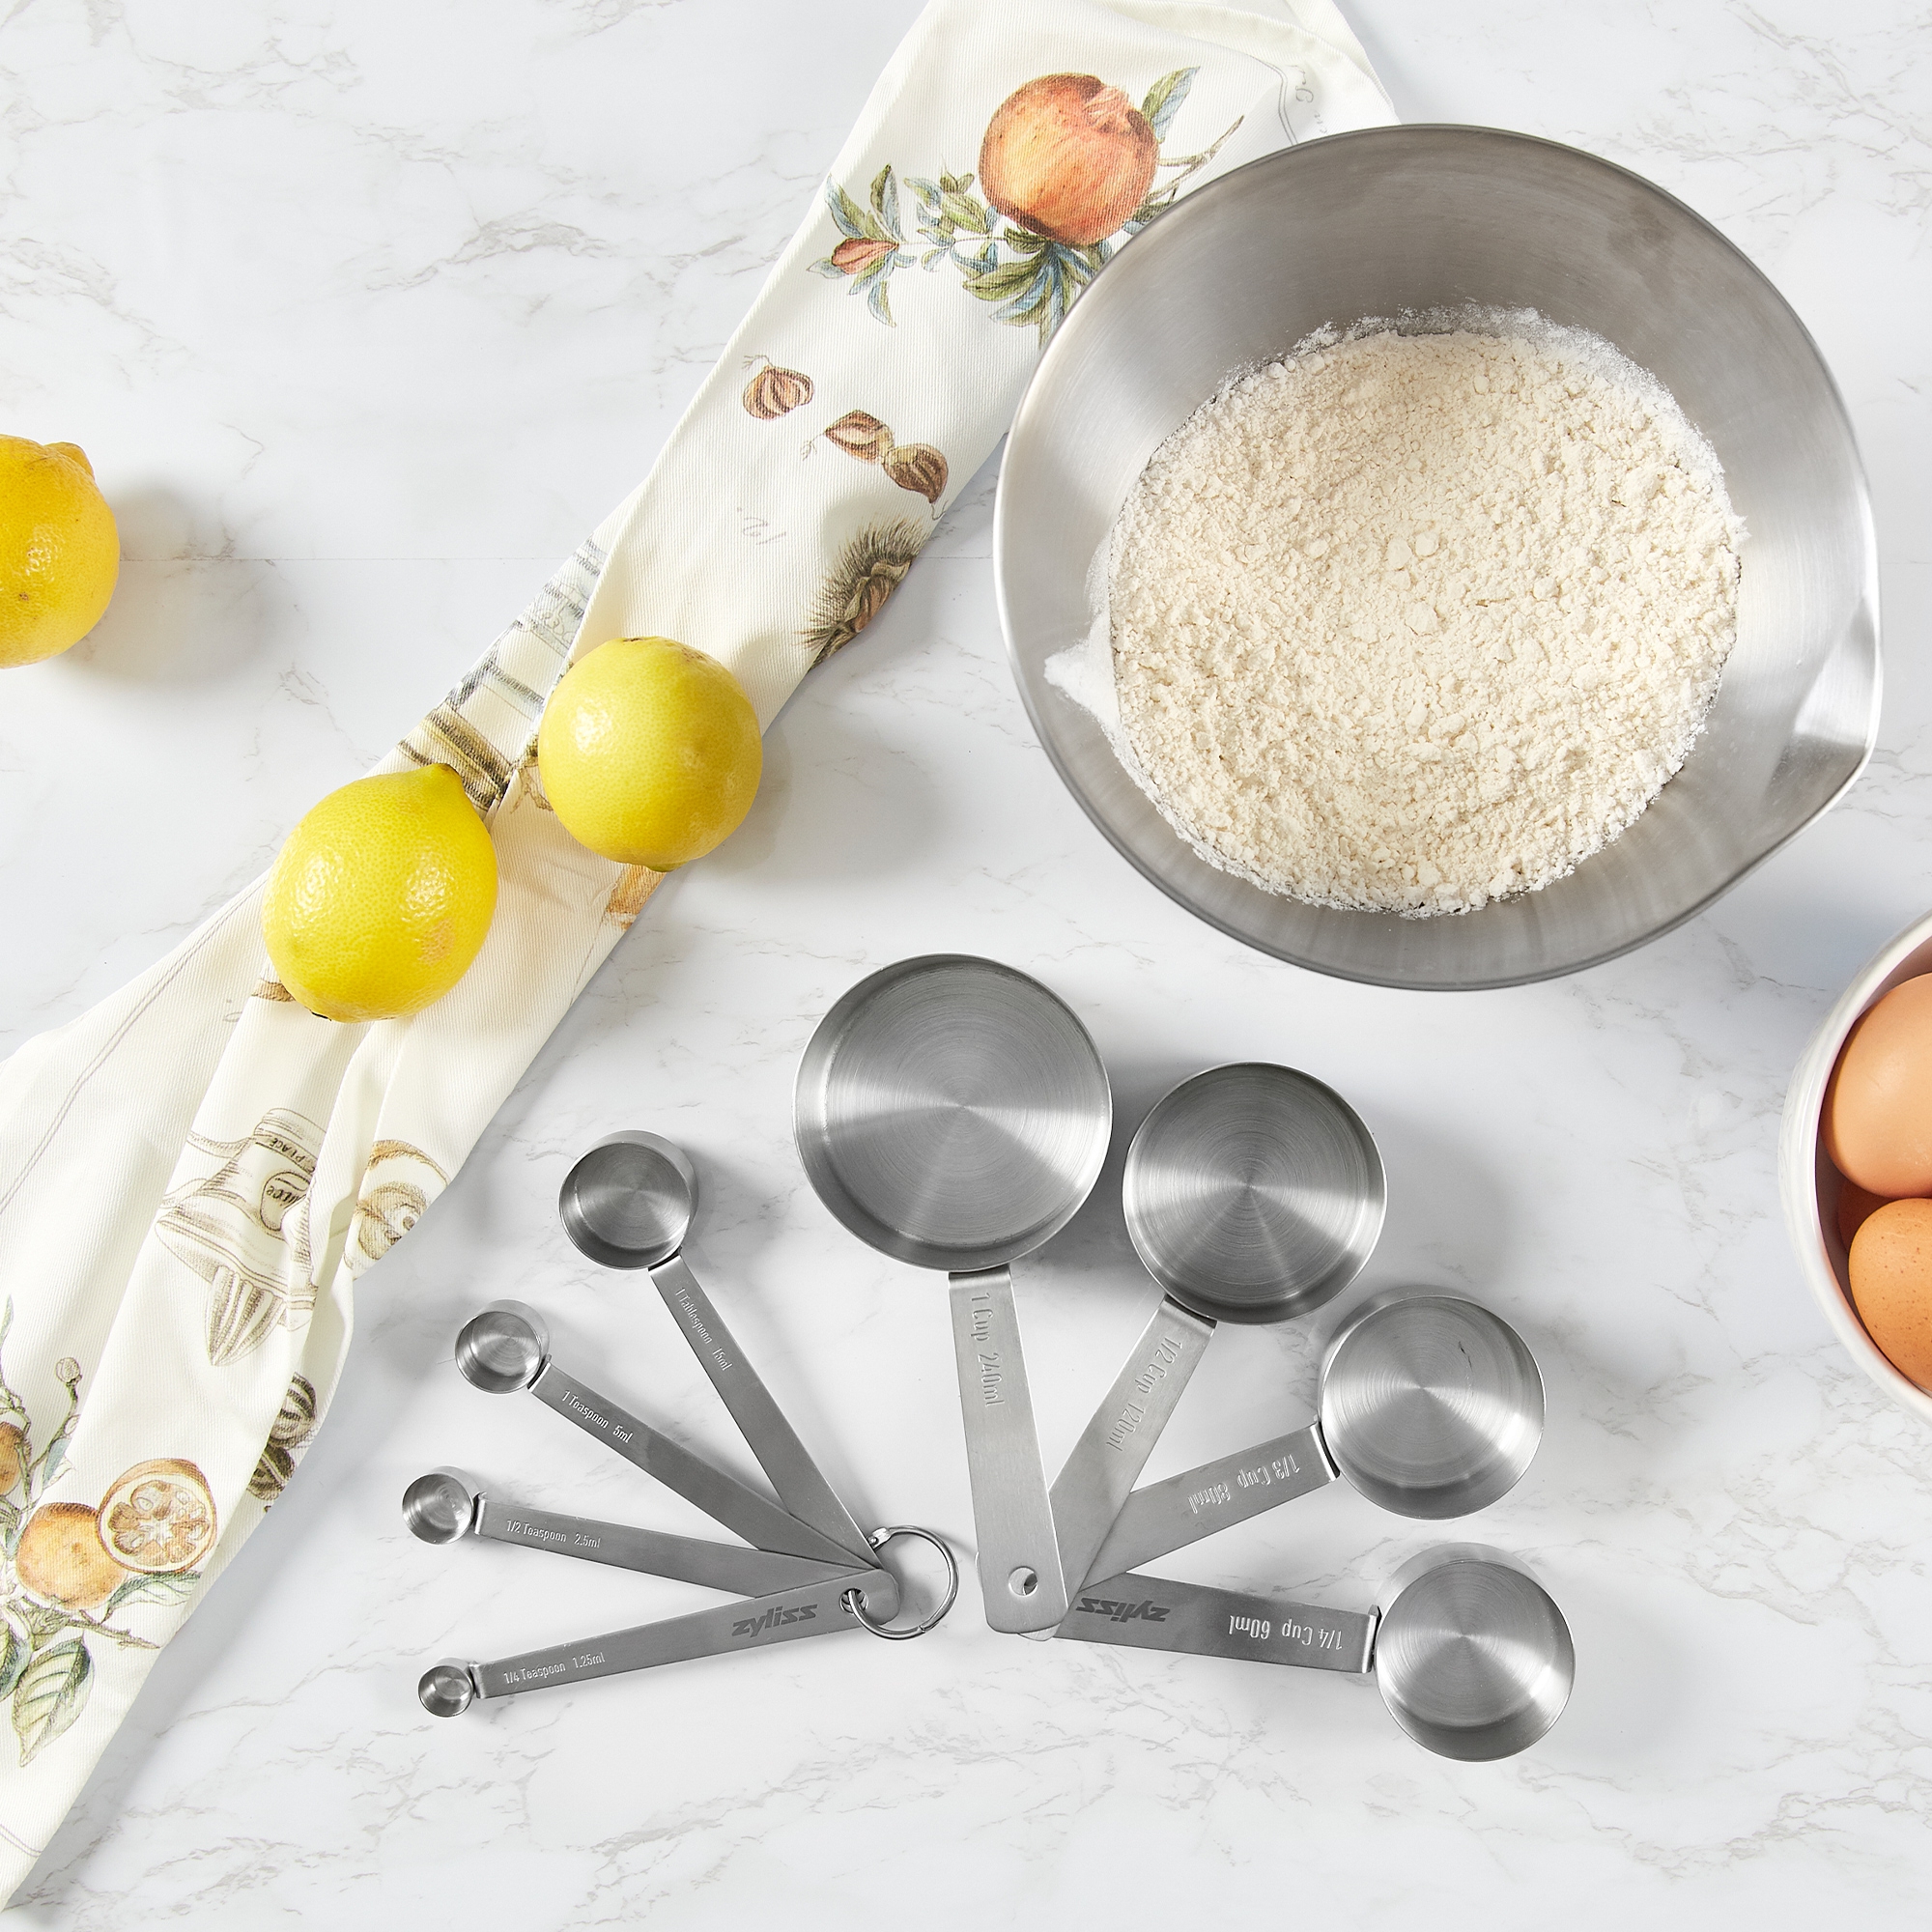 Zyliss - Measuring spoon in 4 different sizes